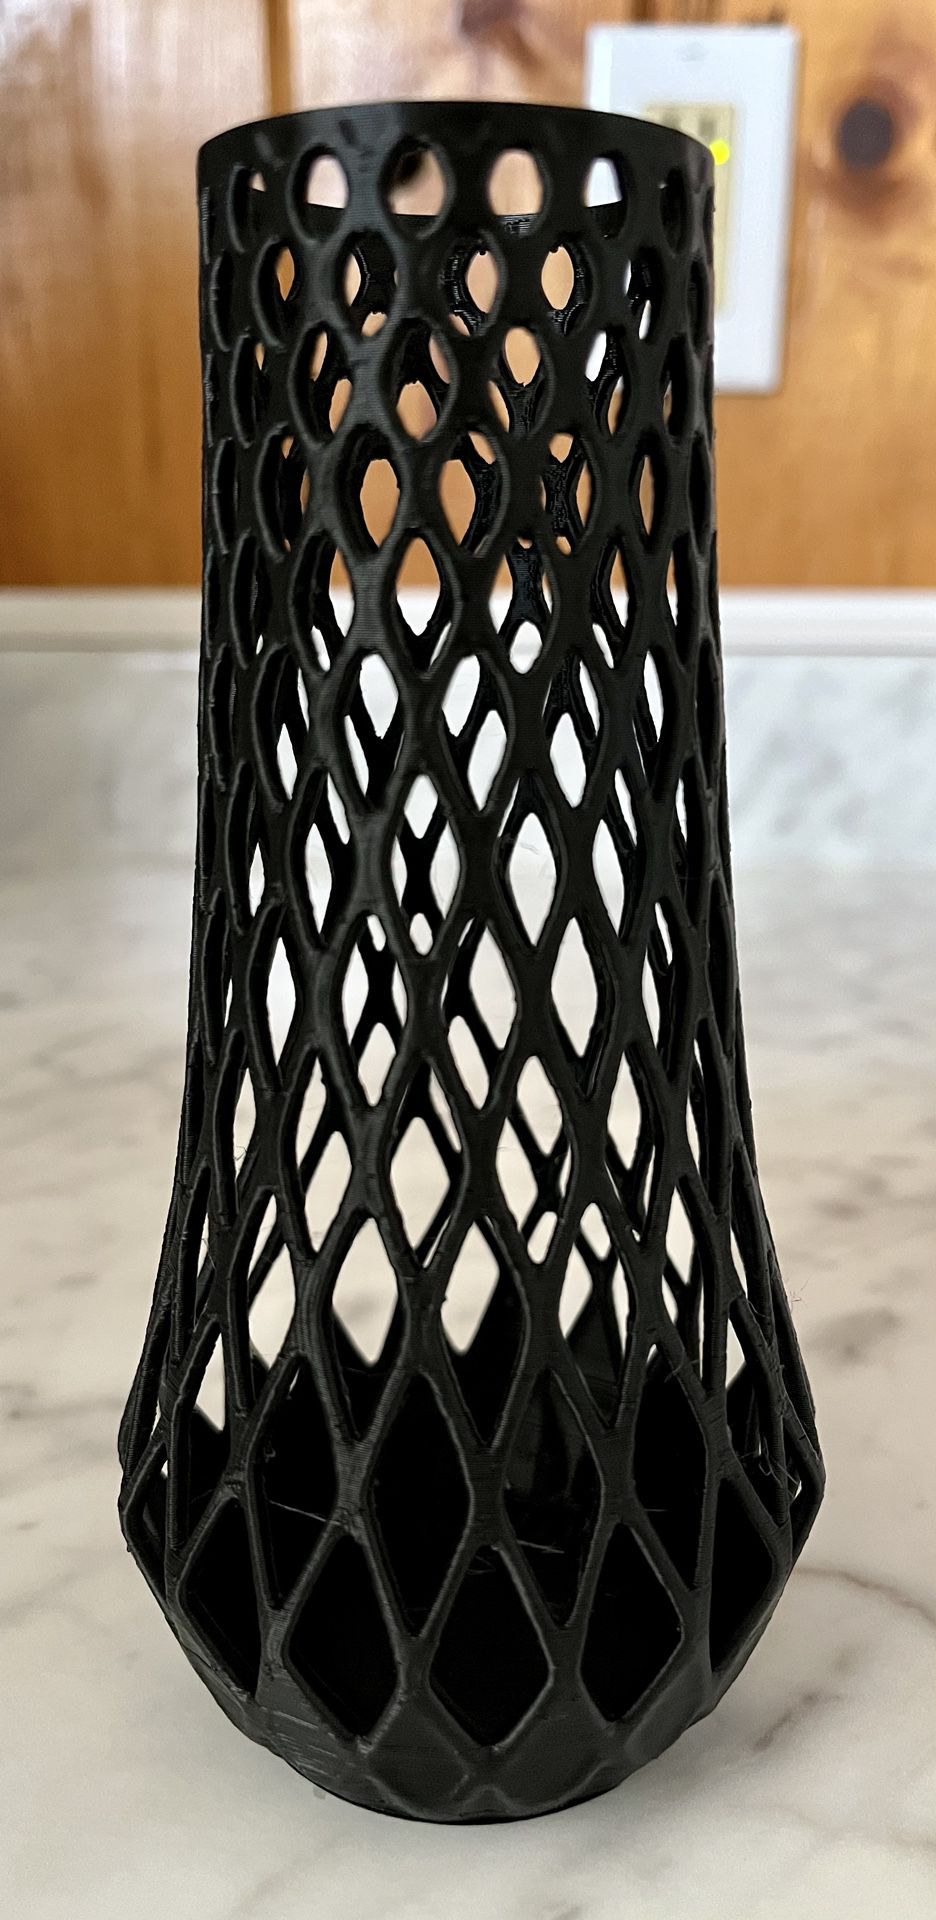 NEW Black 6 Inch Unique Architectural Table Vase for home or office decoration